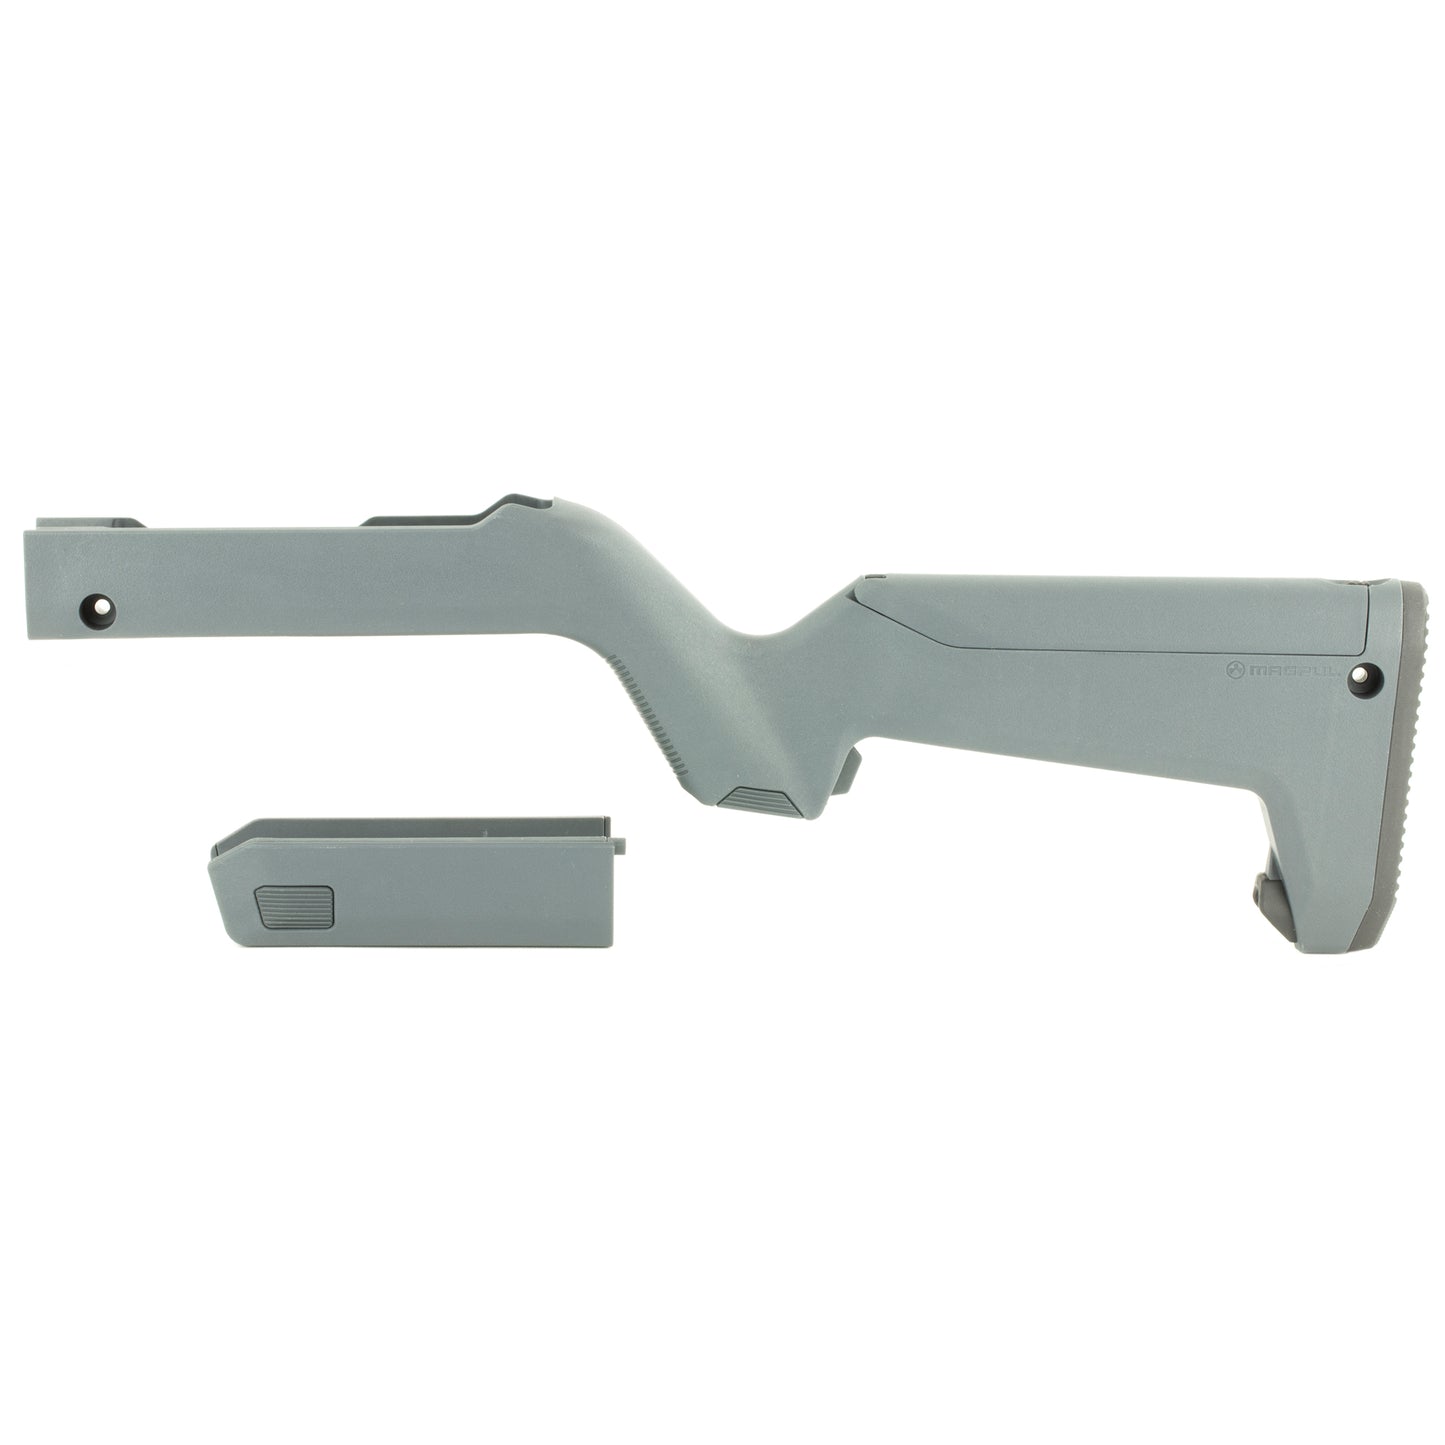 Magpul Industries X22 Backpacker Stock Fits Ruger 10/22 Takedowns MAG808-GRY - California Shooting Supplies